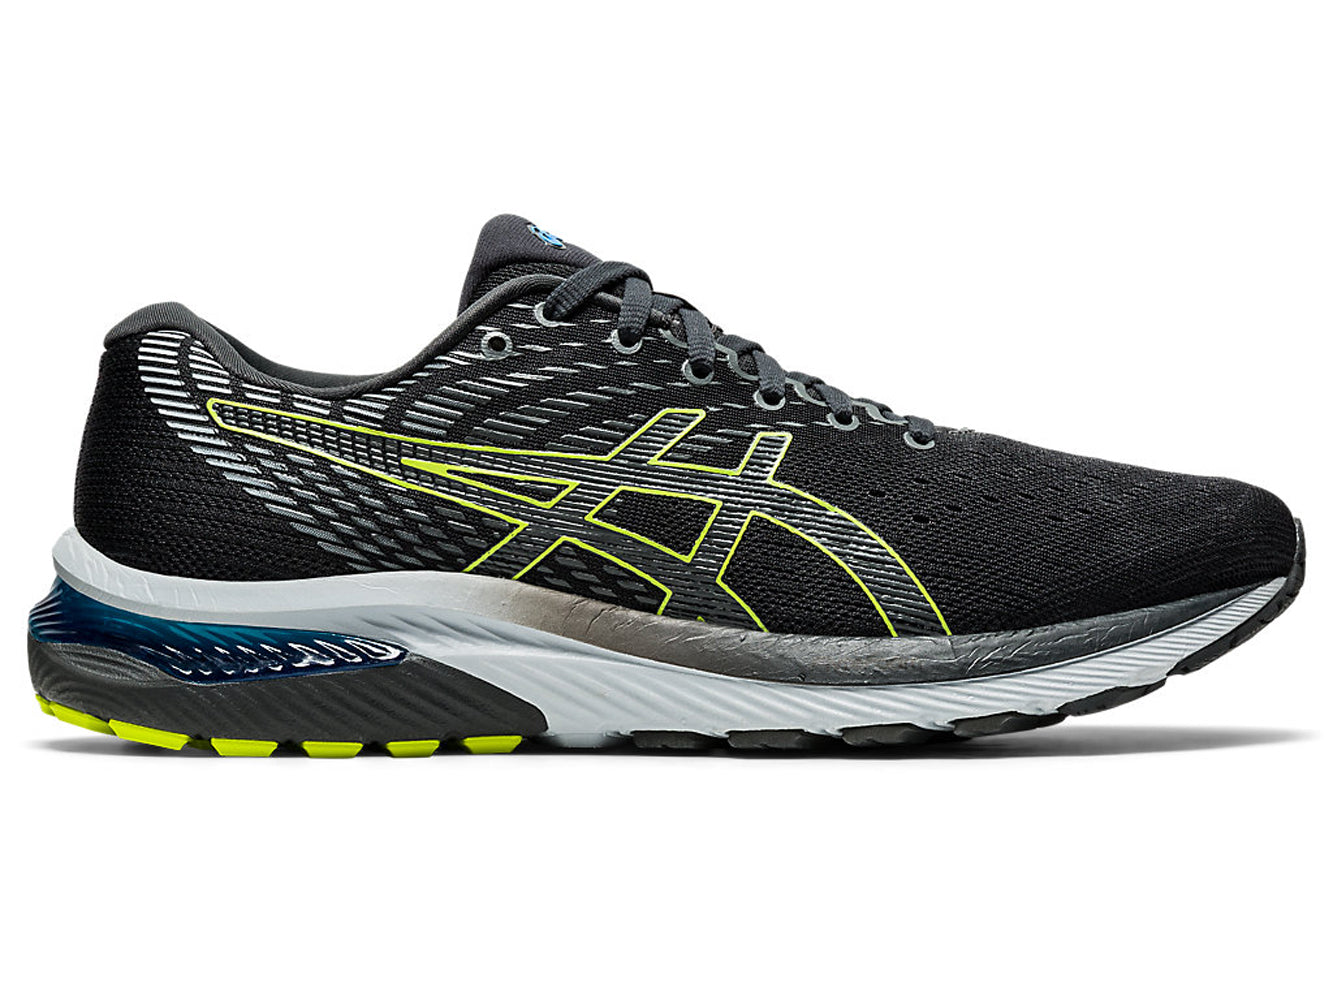 Men's Asics GEL-Cumulus 22 Running Shoe in Graphite Grey/Lime Zest from the side